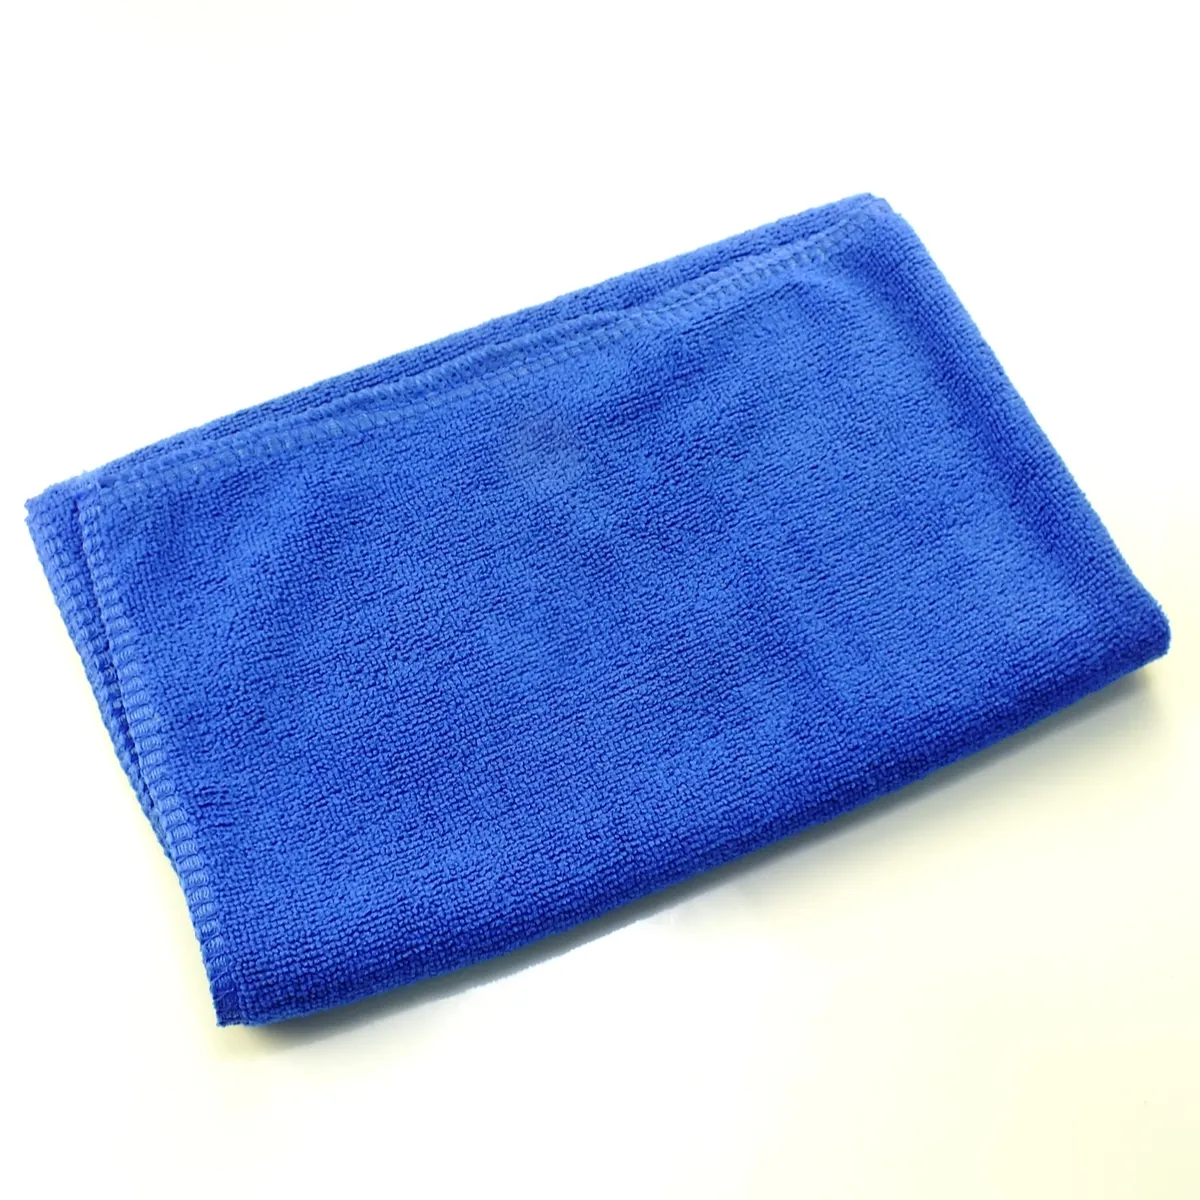 Best Grade Soft Quality Microfiber Towels for Sale Microfiber Towel 30*30 Microfiber Cleaning Cloth Glass Free Samples Offered .